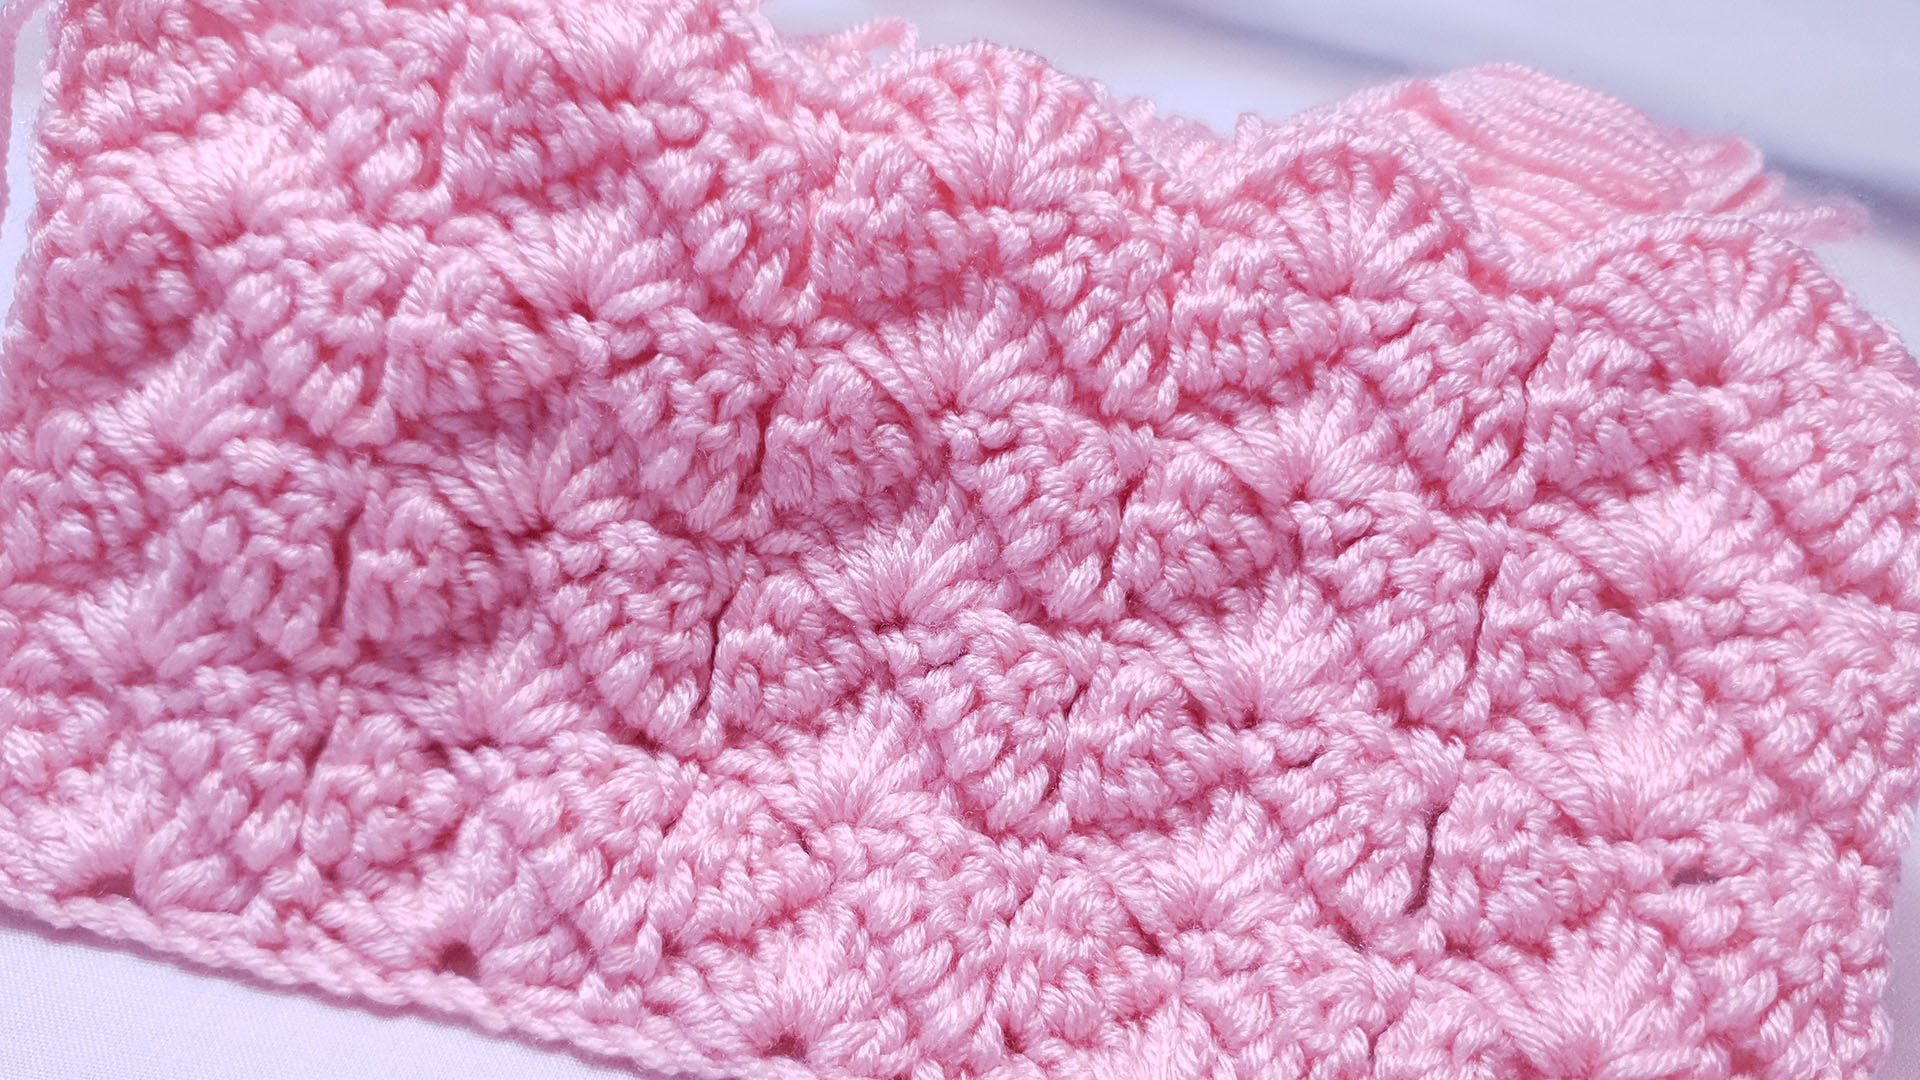 How to crochet the shell and bow stitch